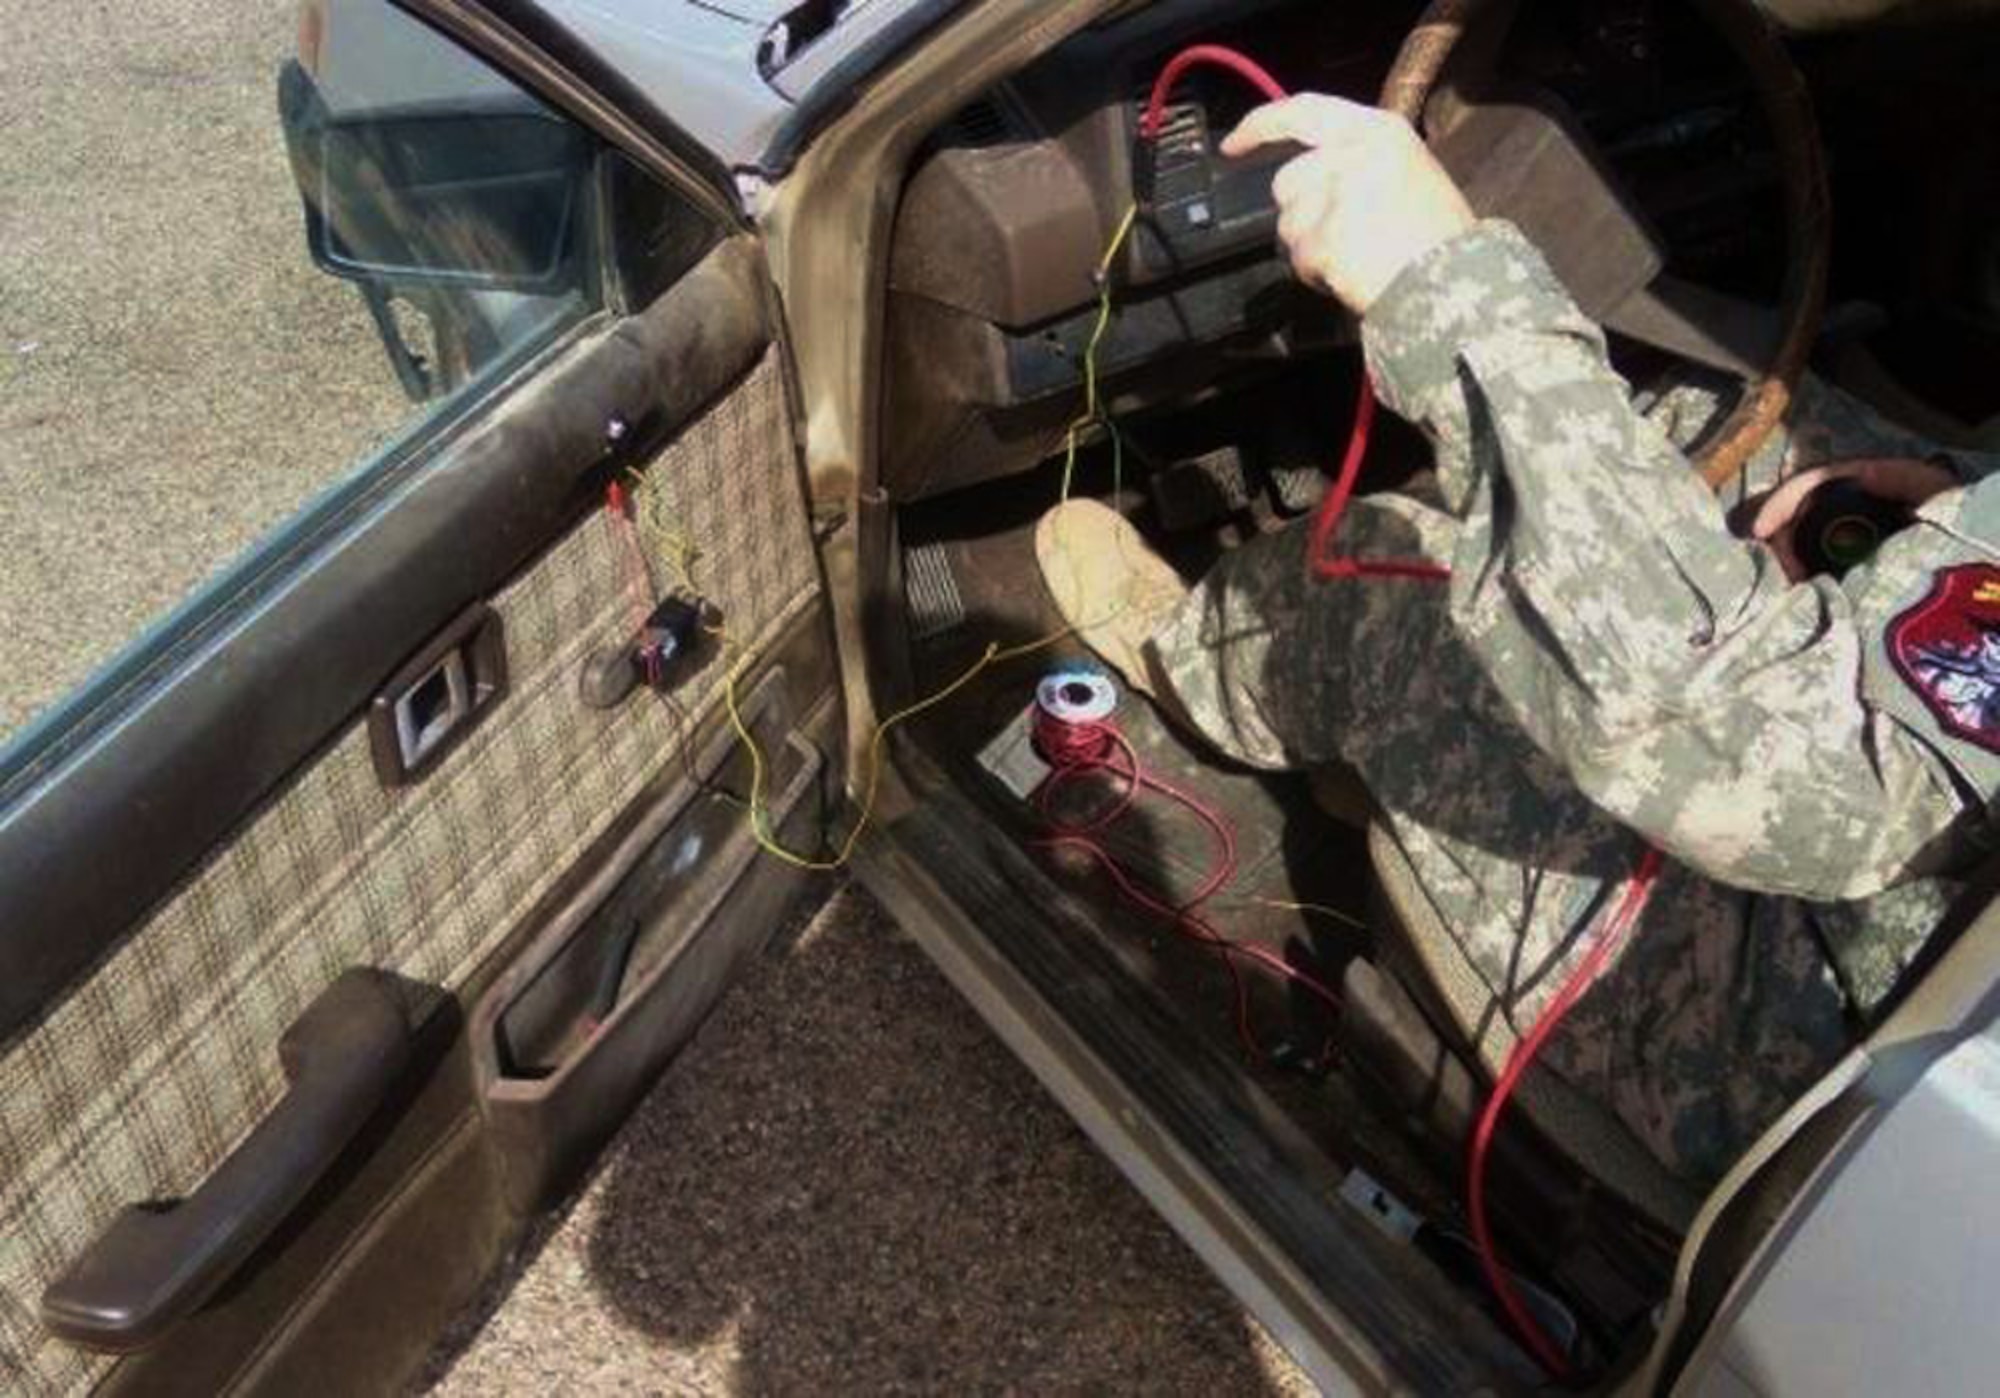 A Navy Weapons Intelligence Team member in training transforms a vehicle into a training vehicle borne improvised explosive device during a course March 13 at Fort Huachuca, Ariz. Potential WIT members received training in IED construction, fingerprinting, biometrics, foreign weapons, media exploitation and sensitive sight exploitation. (U.S. Air Force photo/Staff Sgt. Joshua Strang) 